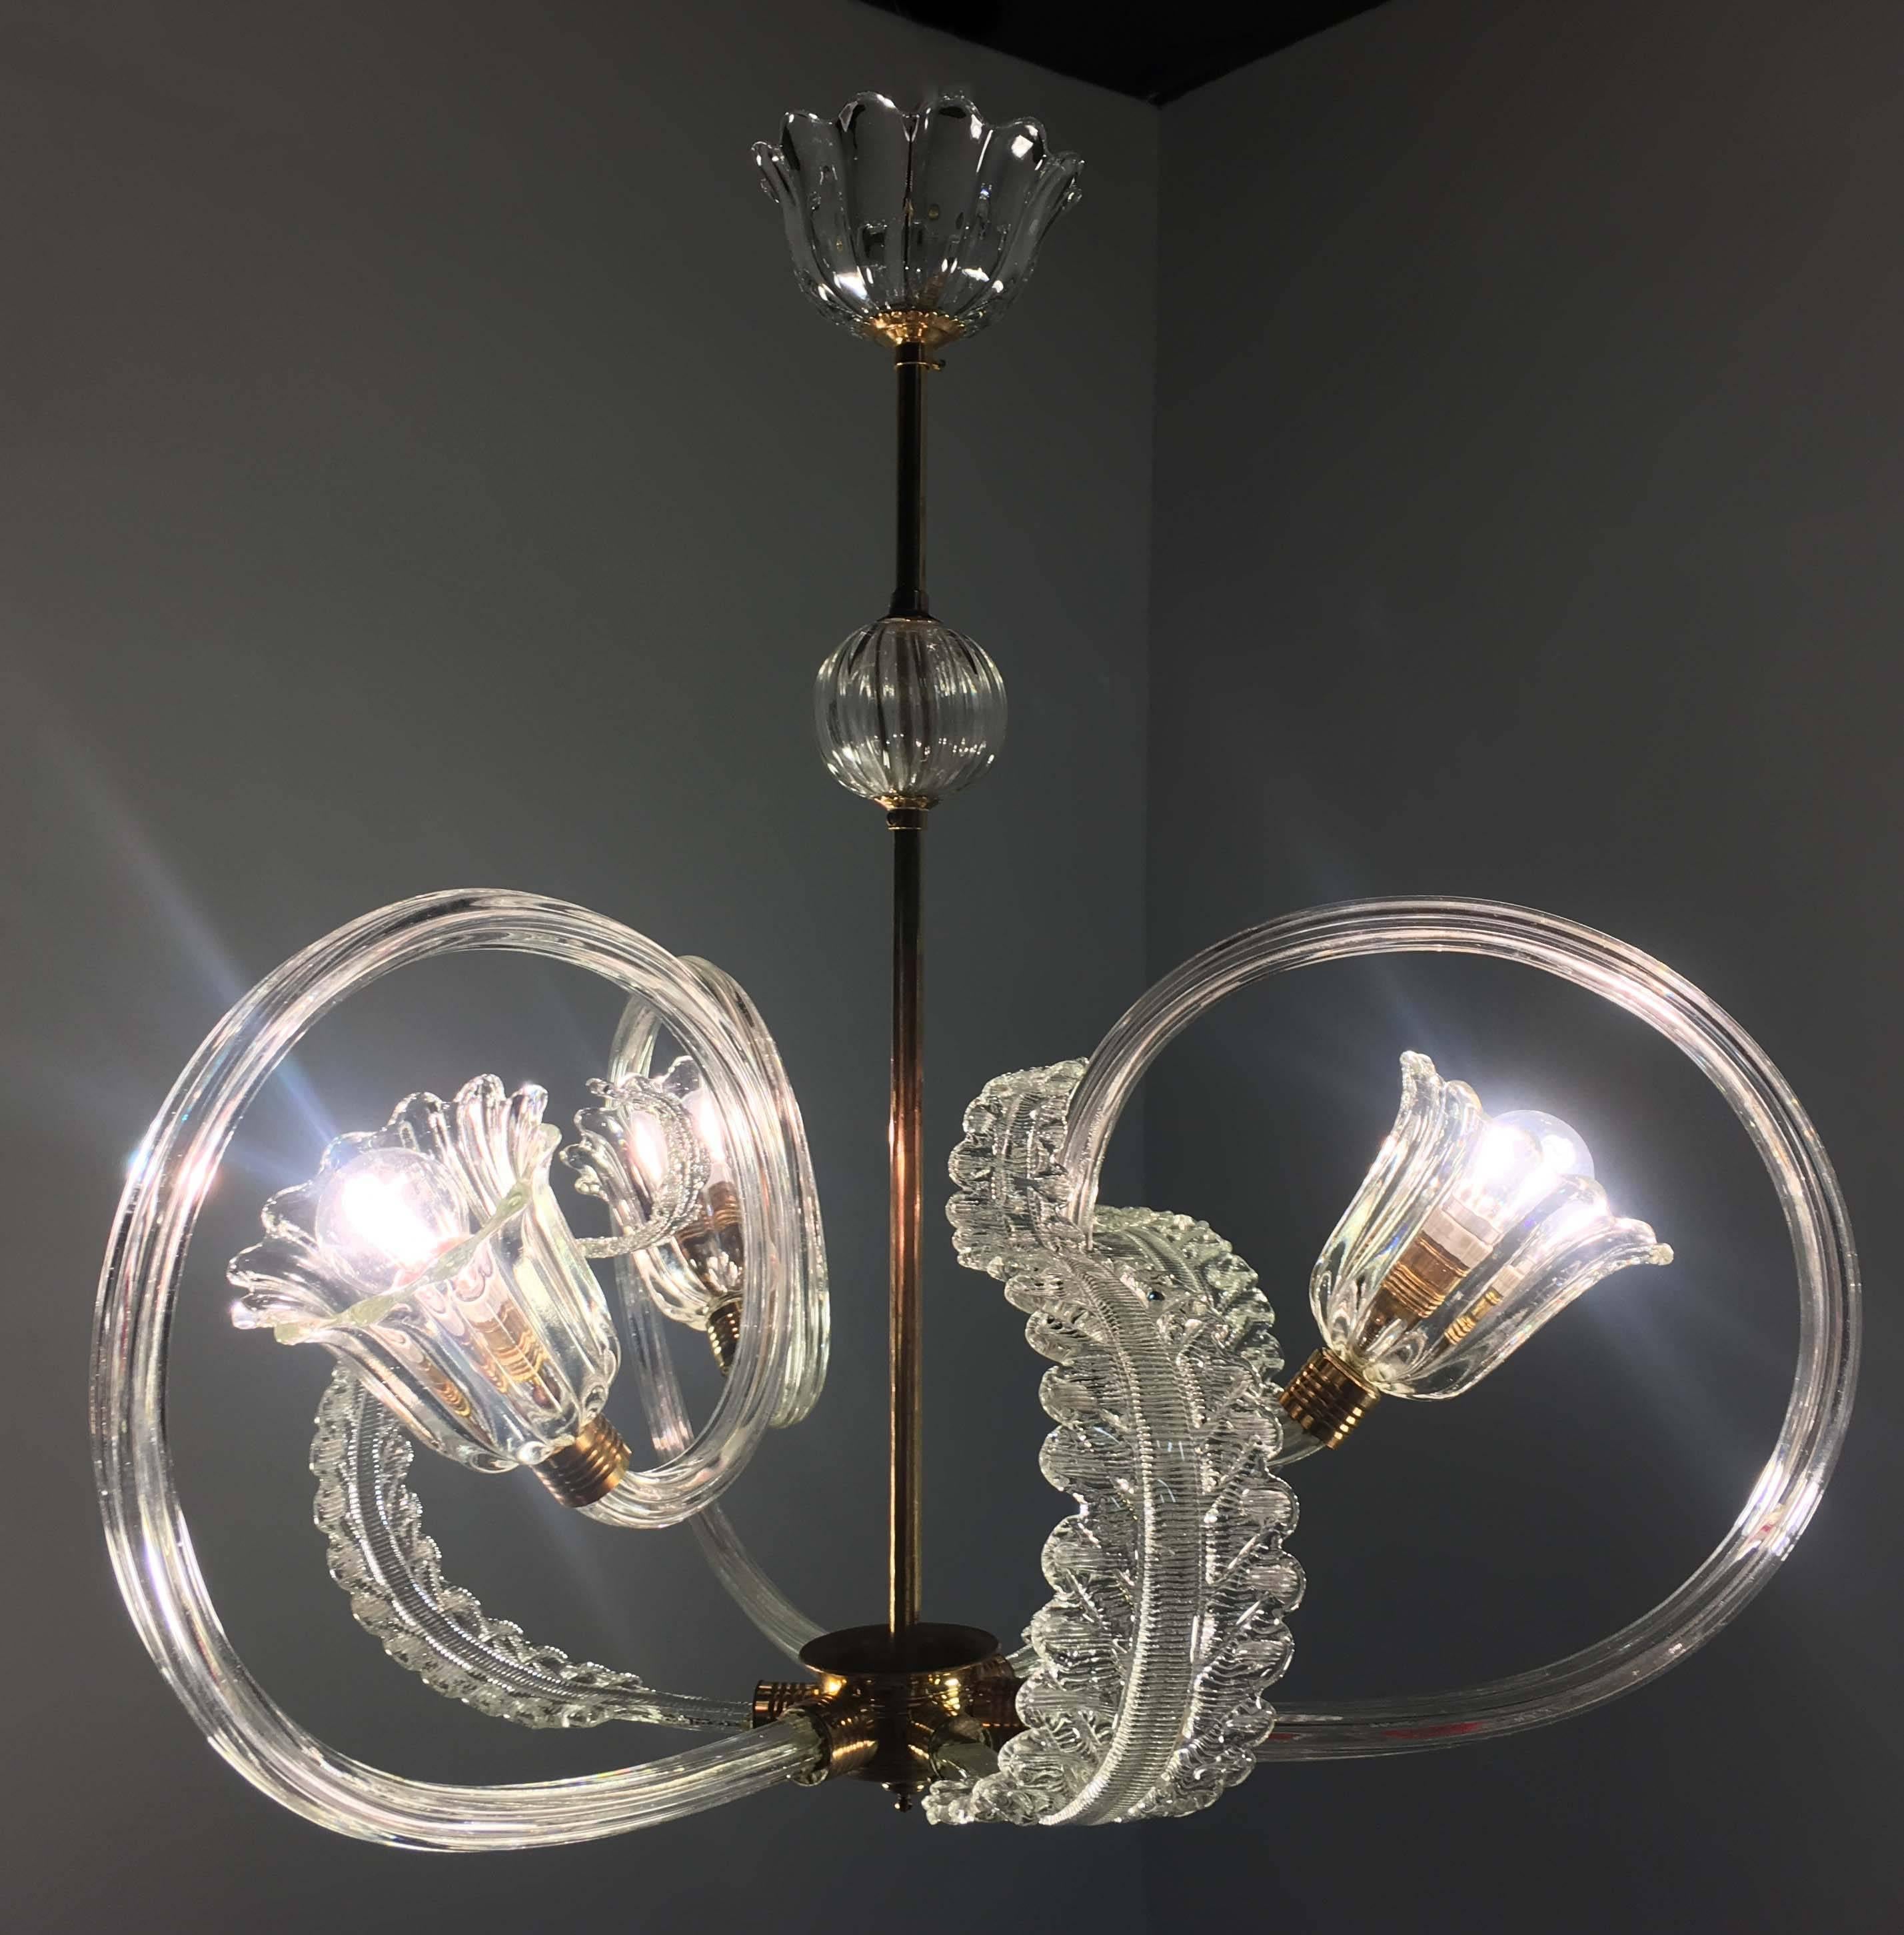 Charming Italian Chandelier by Barovier & Toso, Murano, 1940 For Sale 9